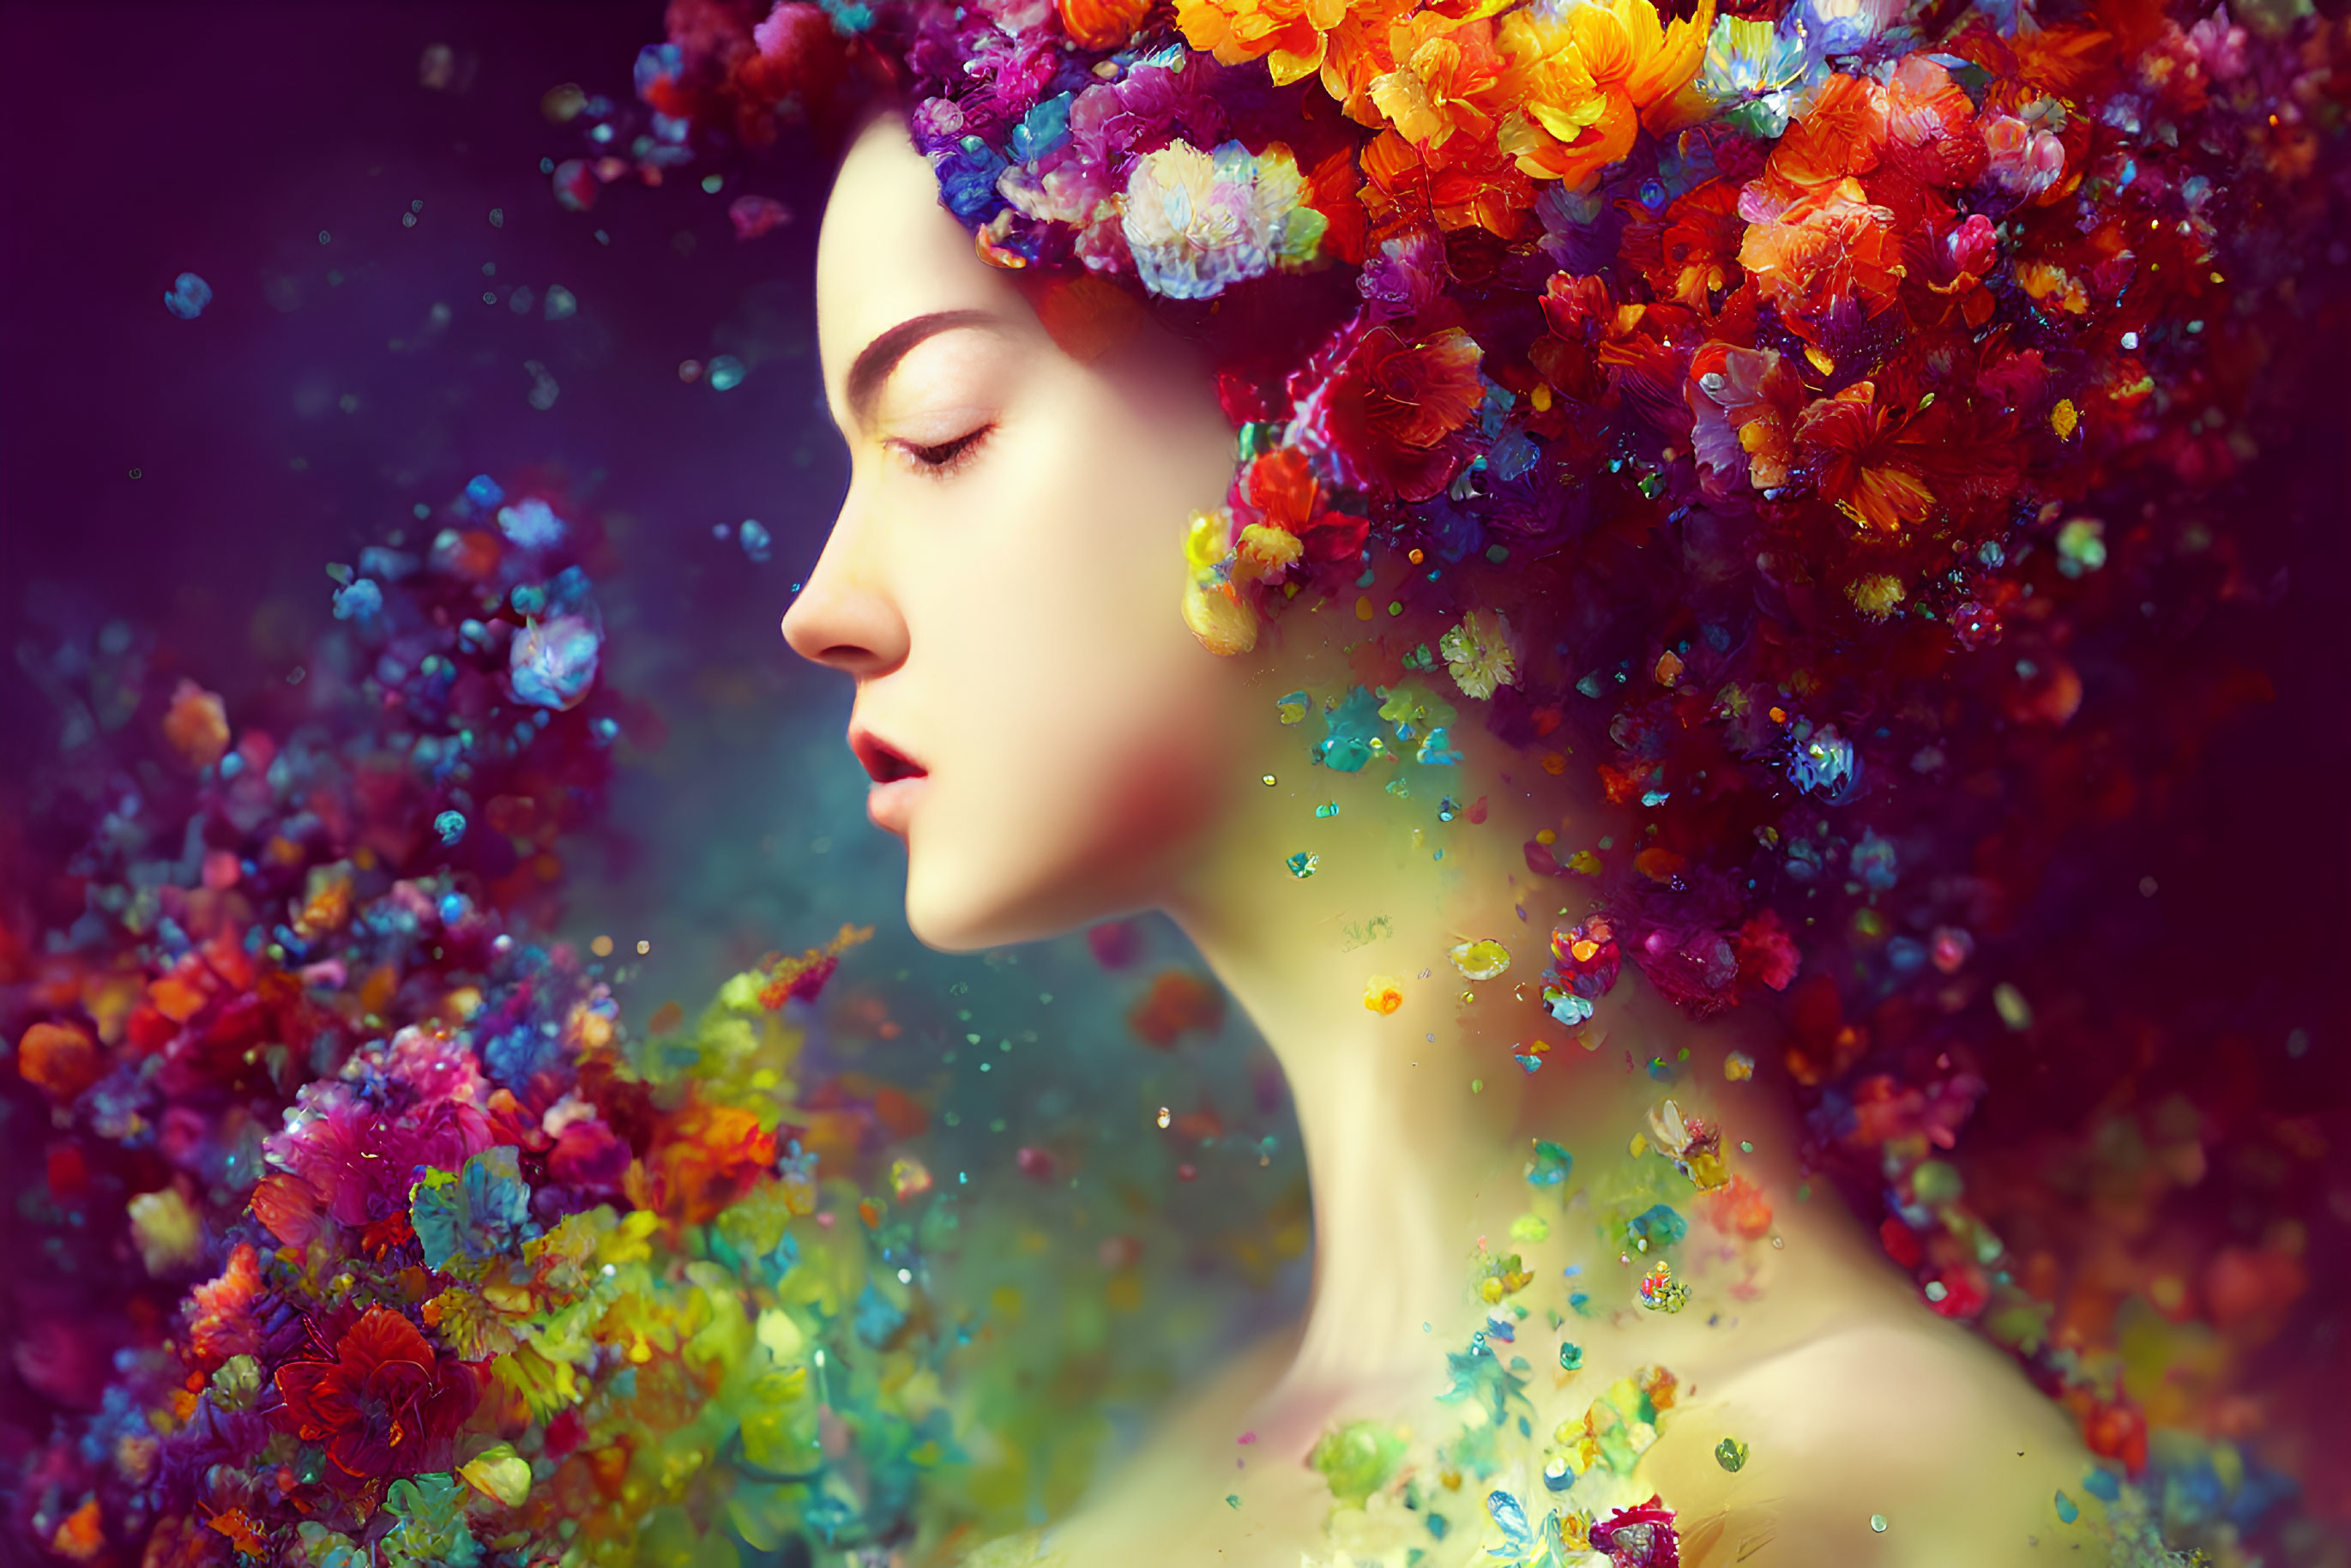 Colorful Floral Woman Portrait with Dreamy Background